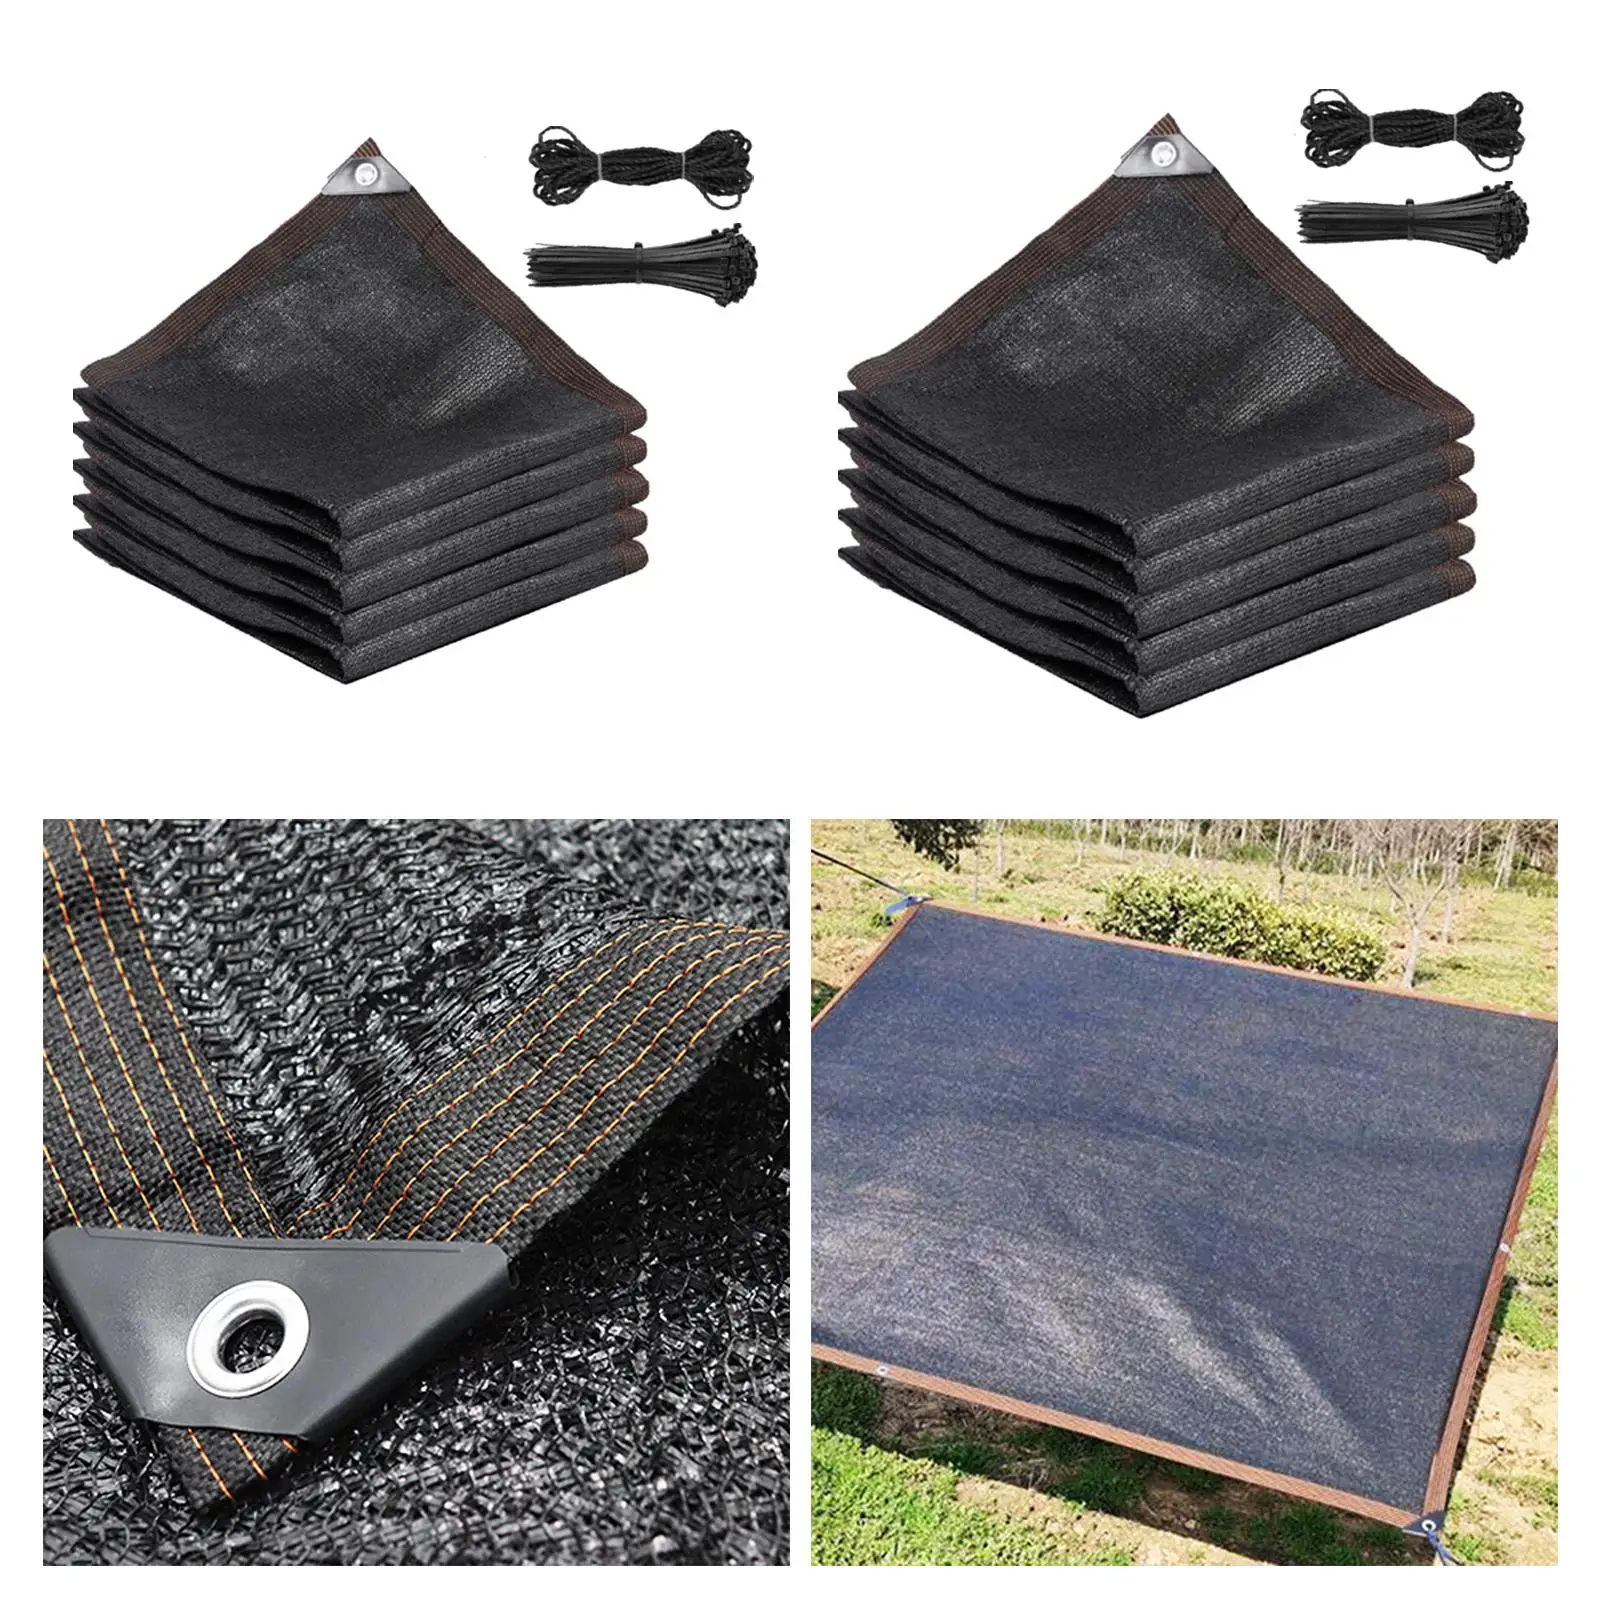 Shade Cloth Heavy Duty Black Awning Cover Sunblock Shade Cloth for Plants for Backyard Plants Growing Pet Kennels Balcony Deck